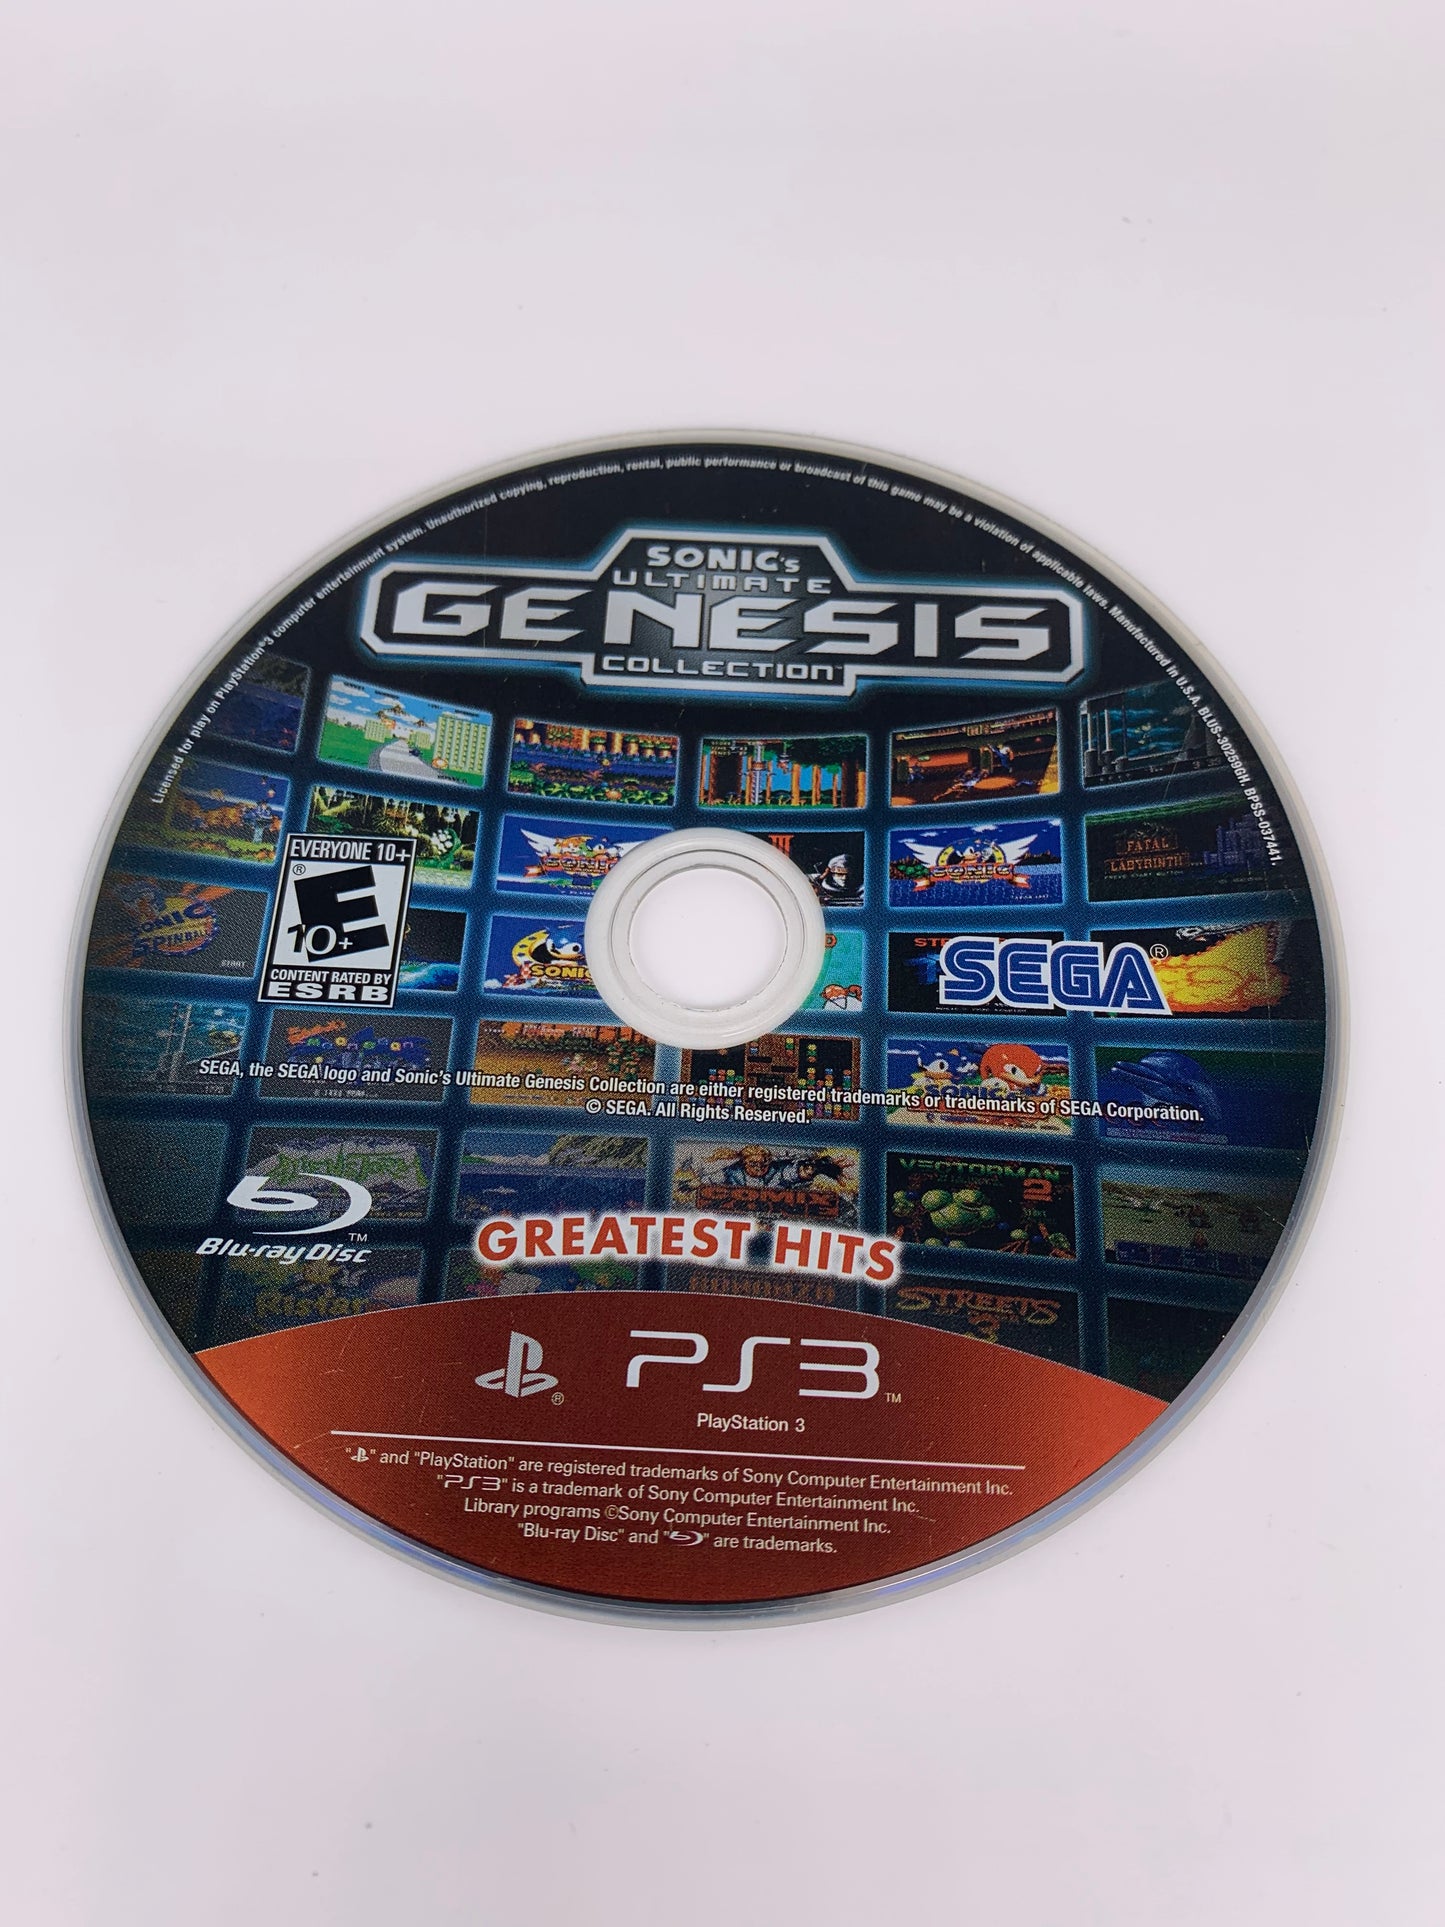 SONY PLAYSTATiON 3 [PS3] | SONiCS ULTiMATE GENESiS COLLECTiON | GREATEST HiTS